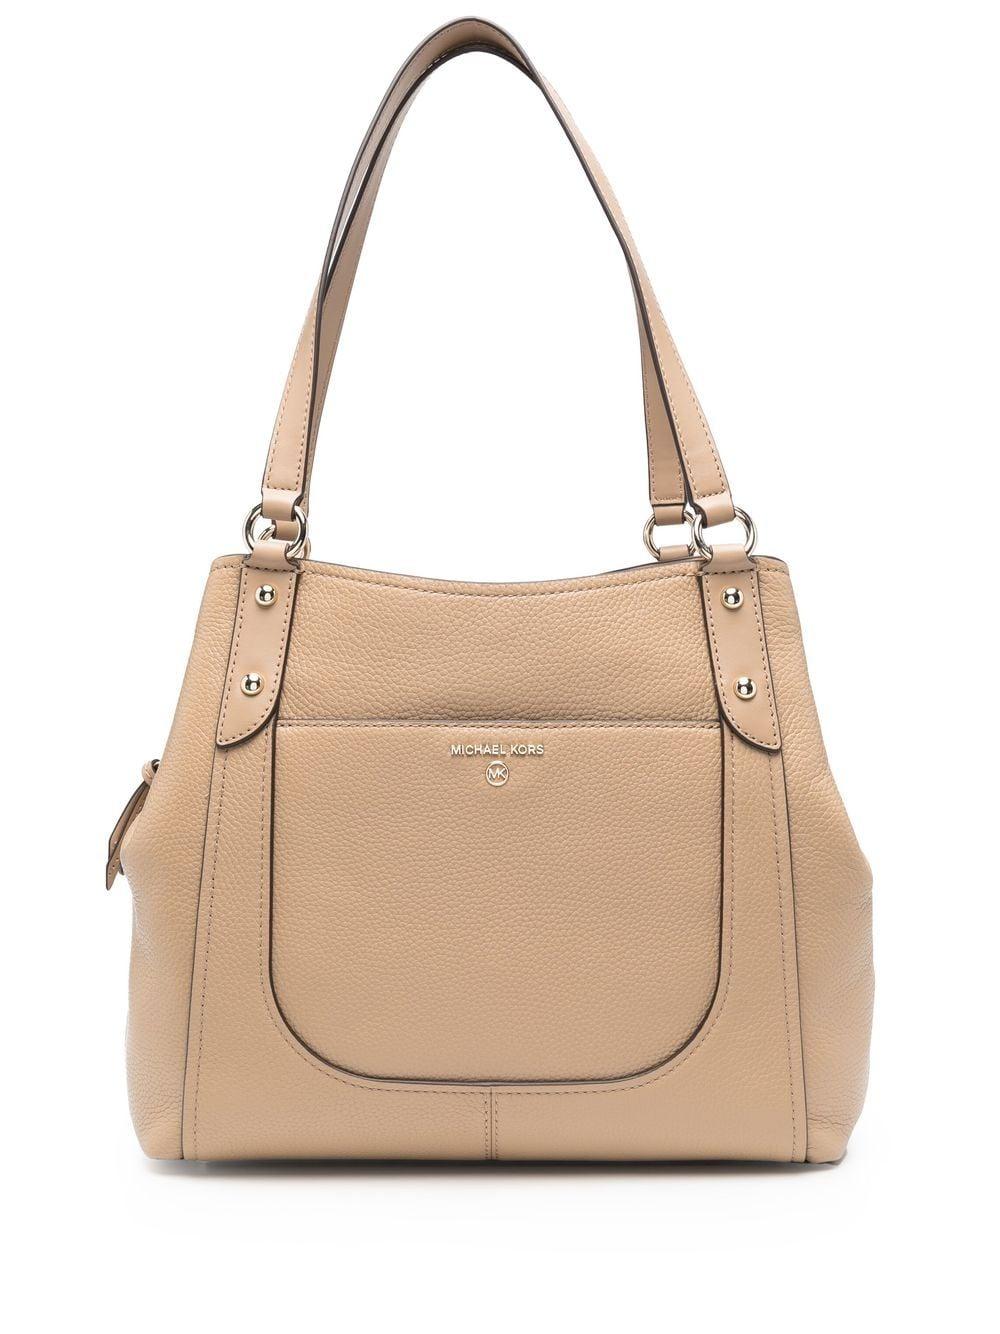 MICHAEL Michael Kors Molly Pebbled Leather Tote Bag in Natural | Lyst